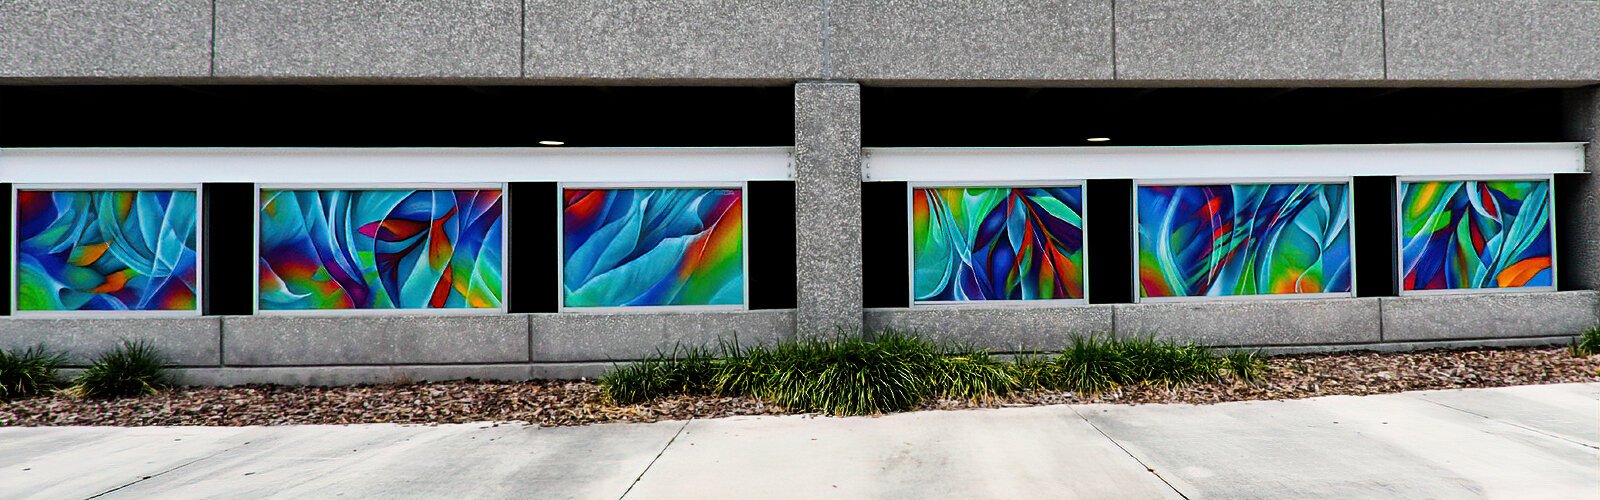 The Myrtle Street side of the Clearwater Municipal Parking Garage is now decorated with multiple murals painted by street artist Dreamweaver.